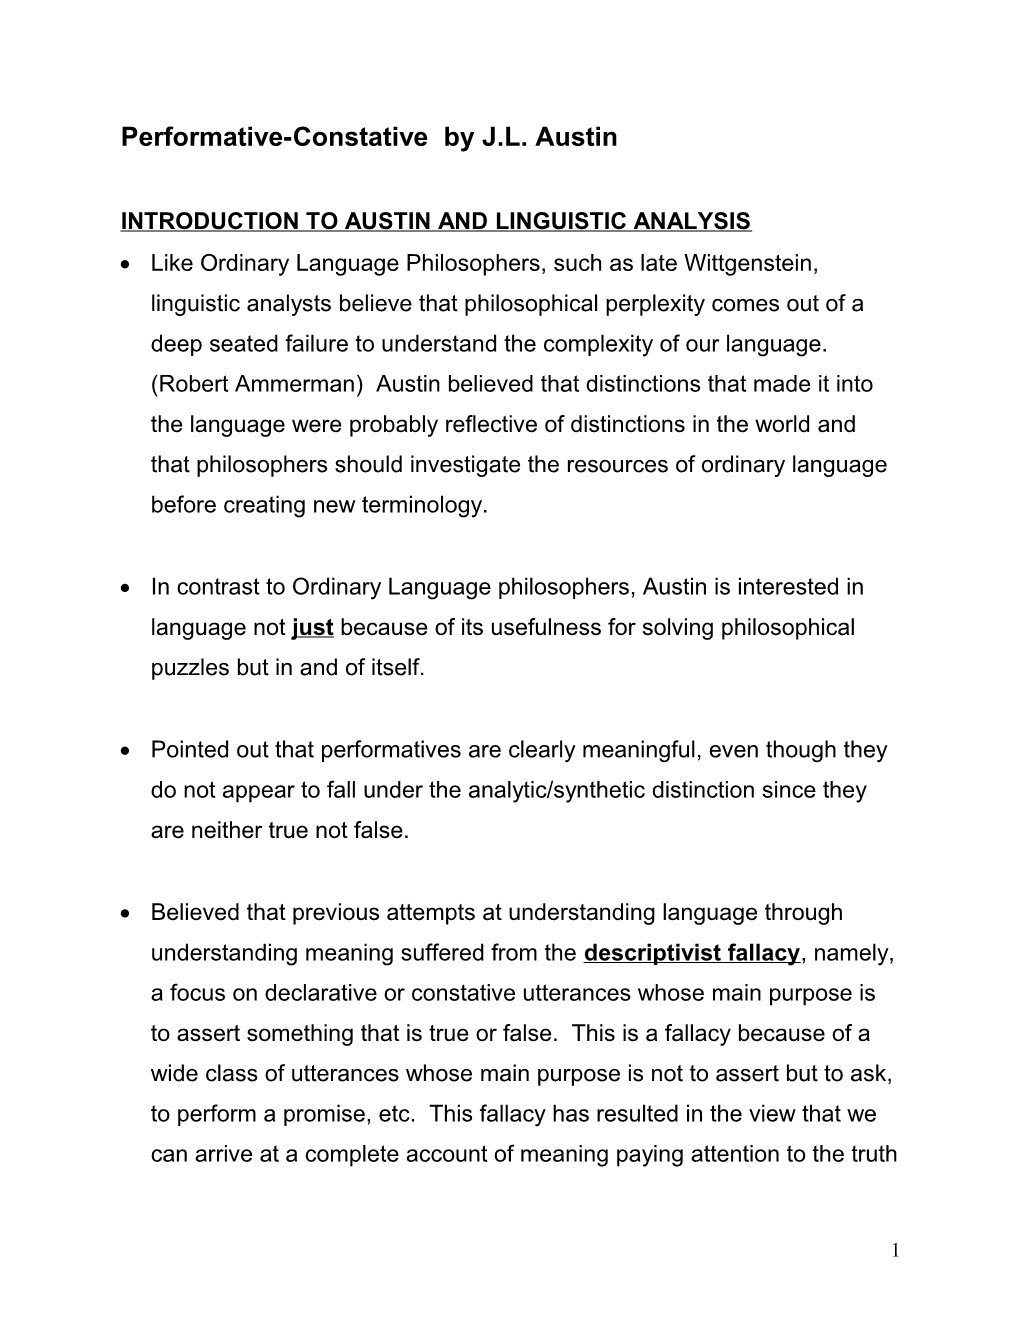 Introduction to Austin and Linguistic Analysis